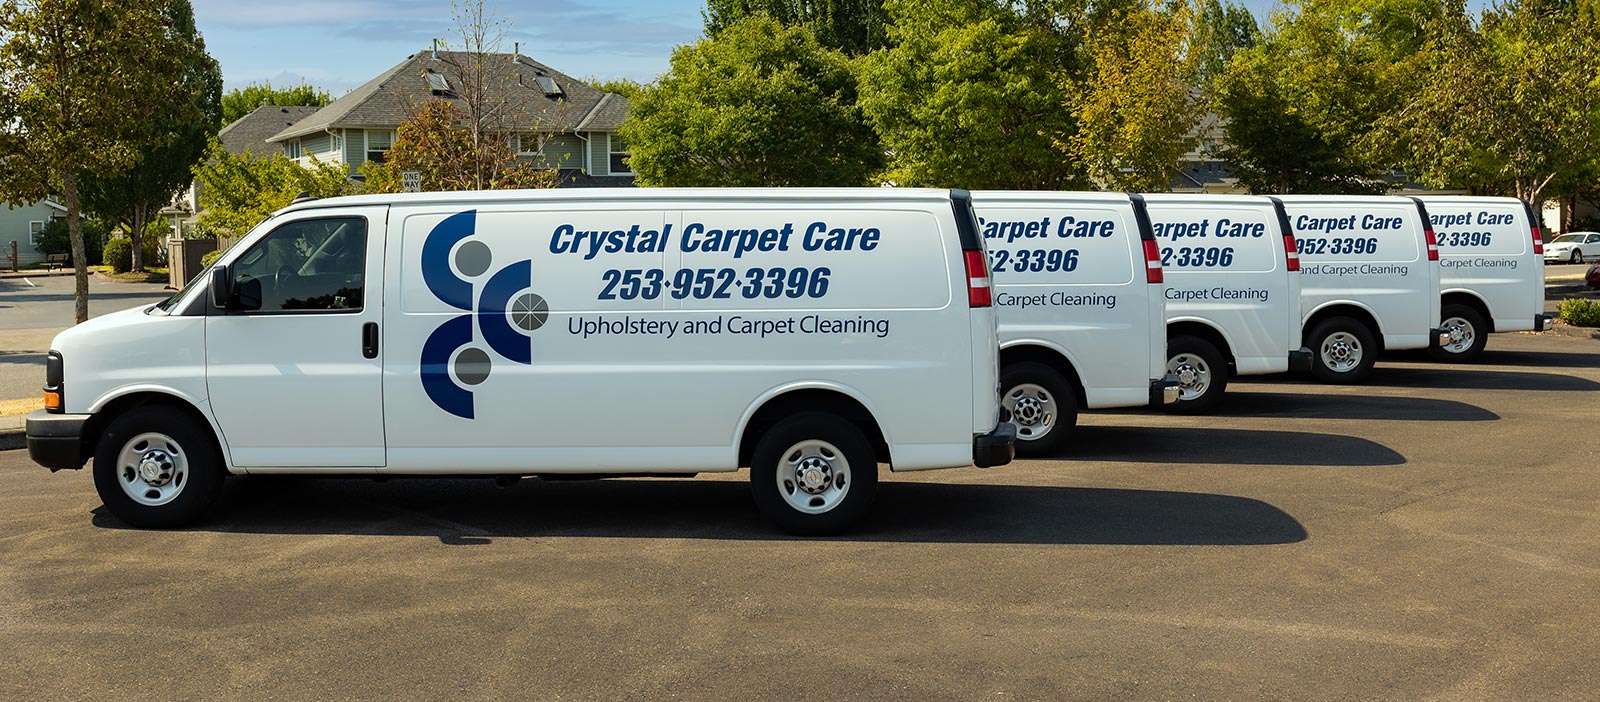 Carpet Cleaning Company Vans